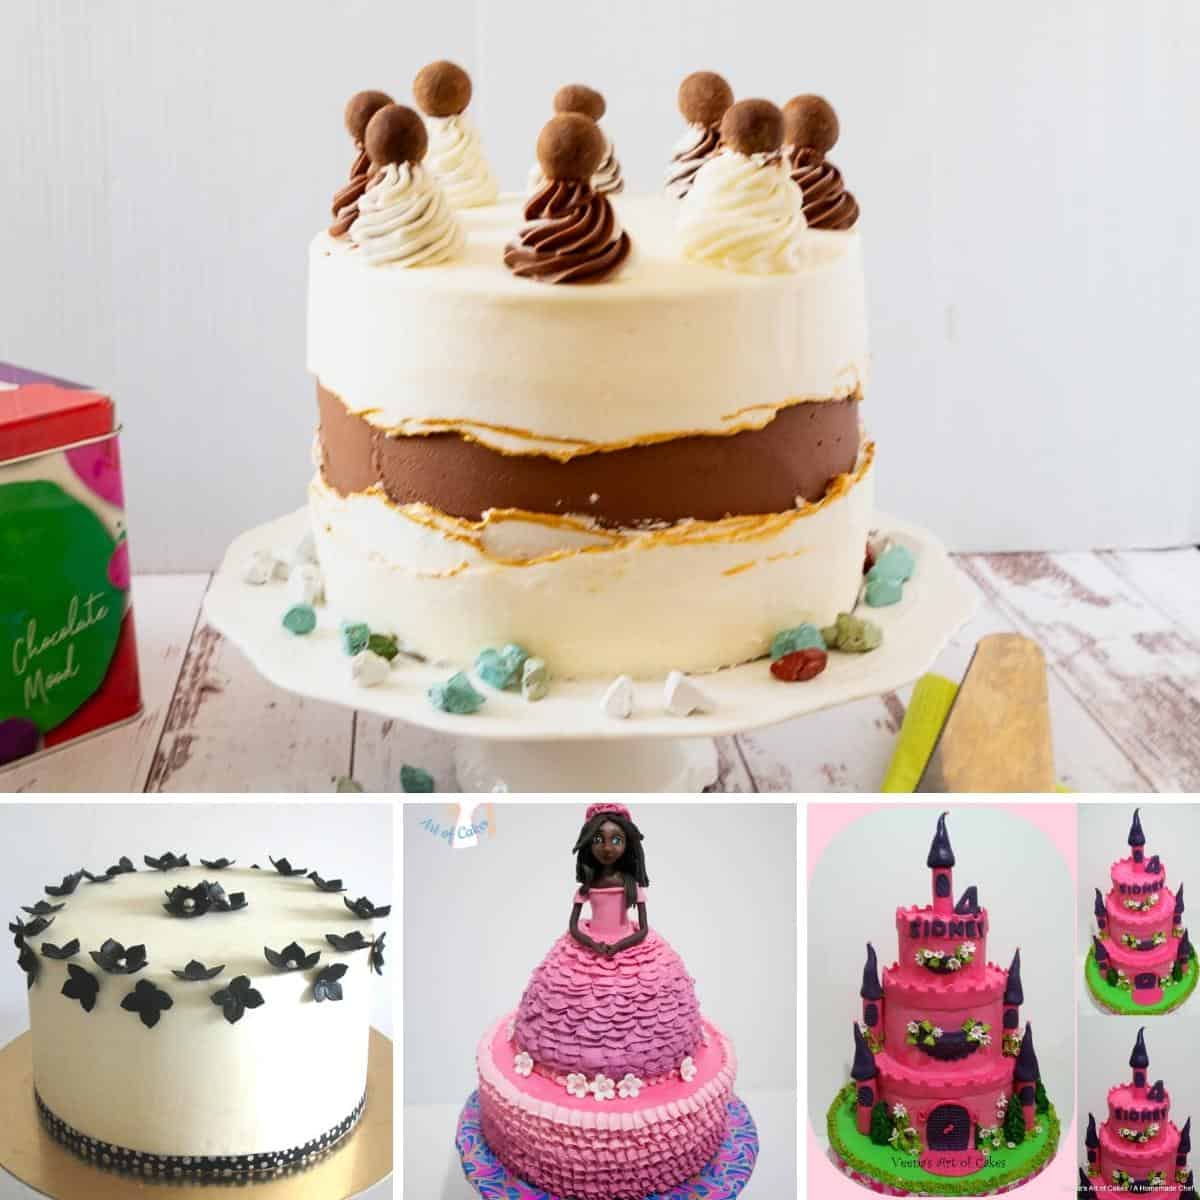 Types of buttercream recipes.